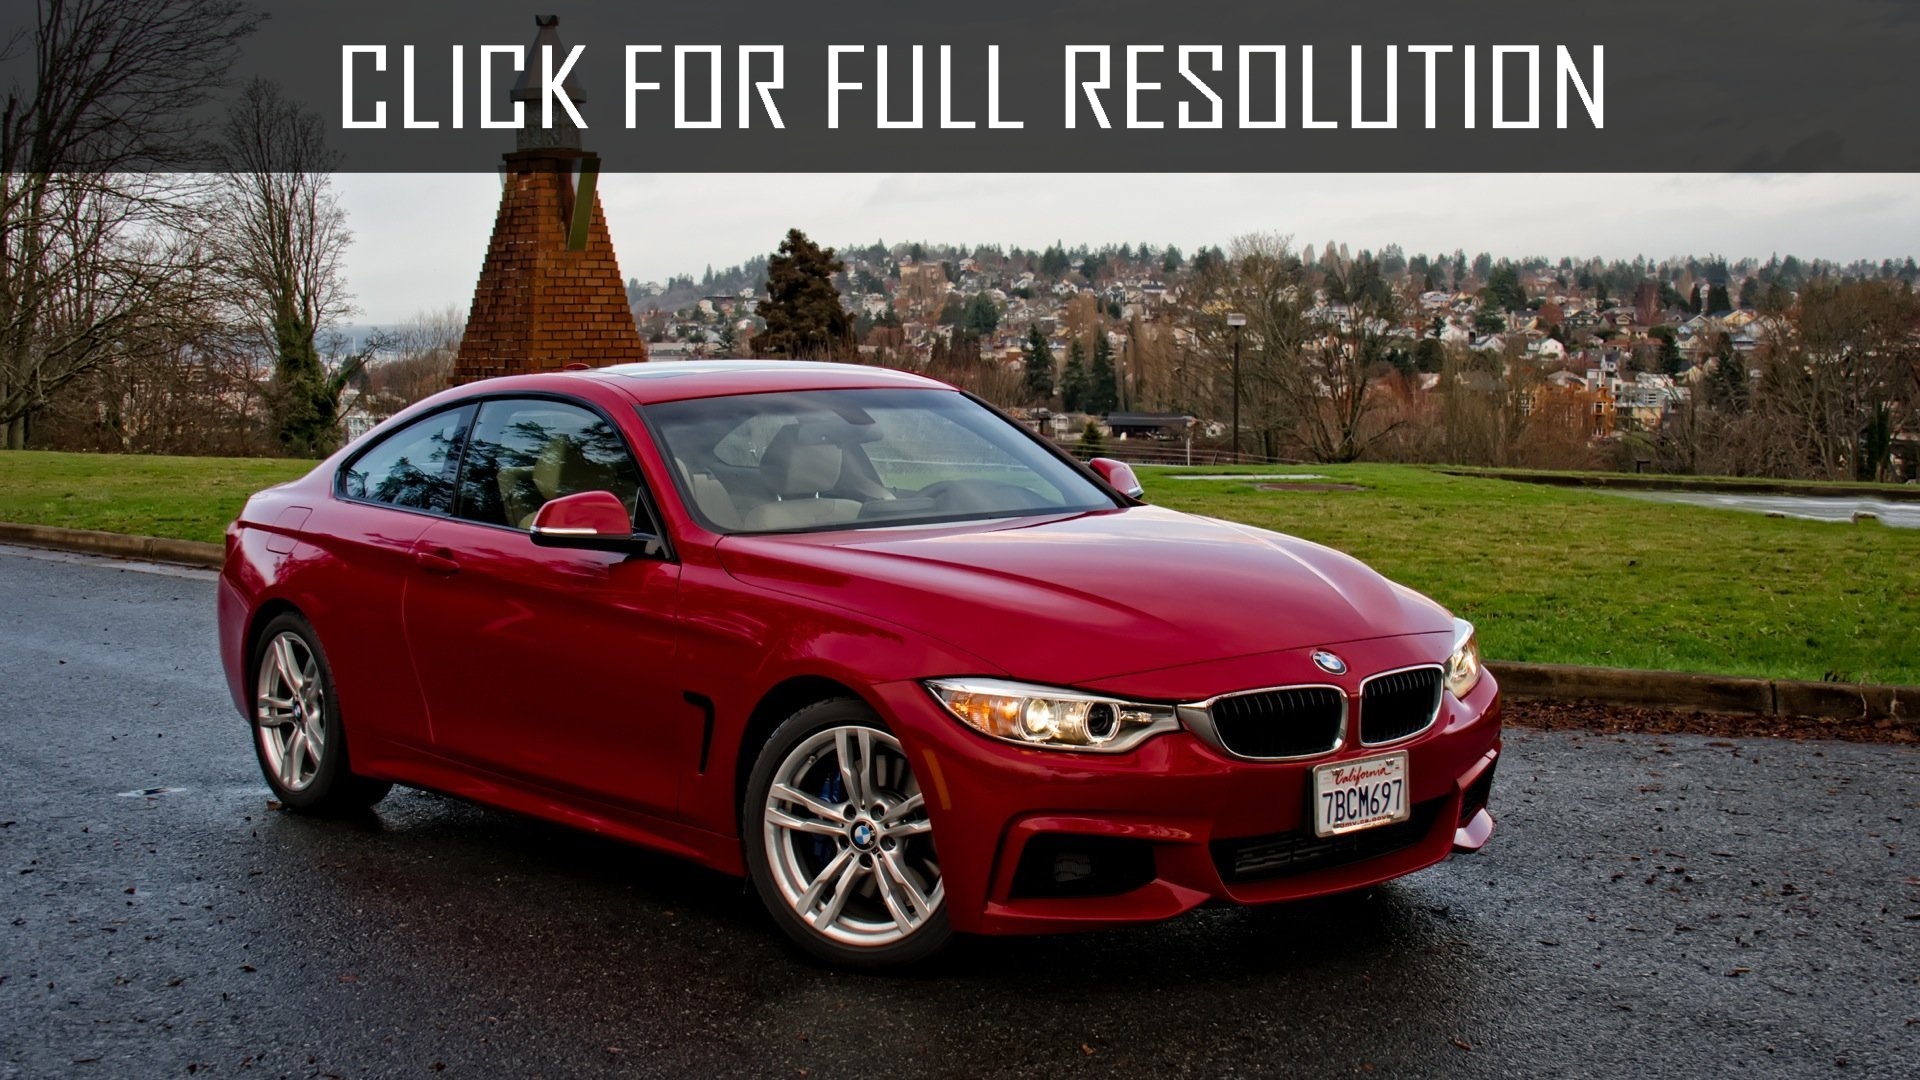 Bmw 428i amazing photo gallery, some information and specifications